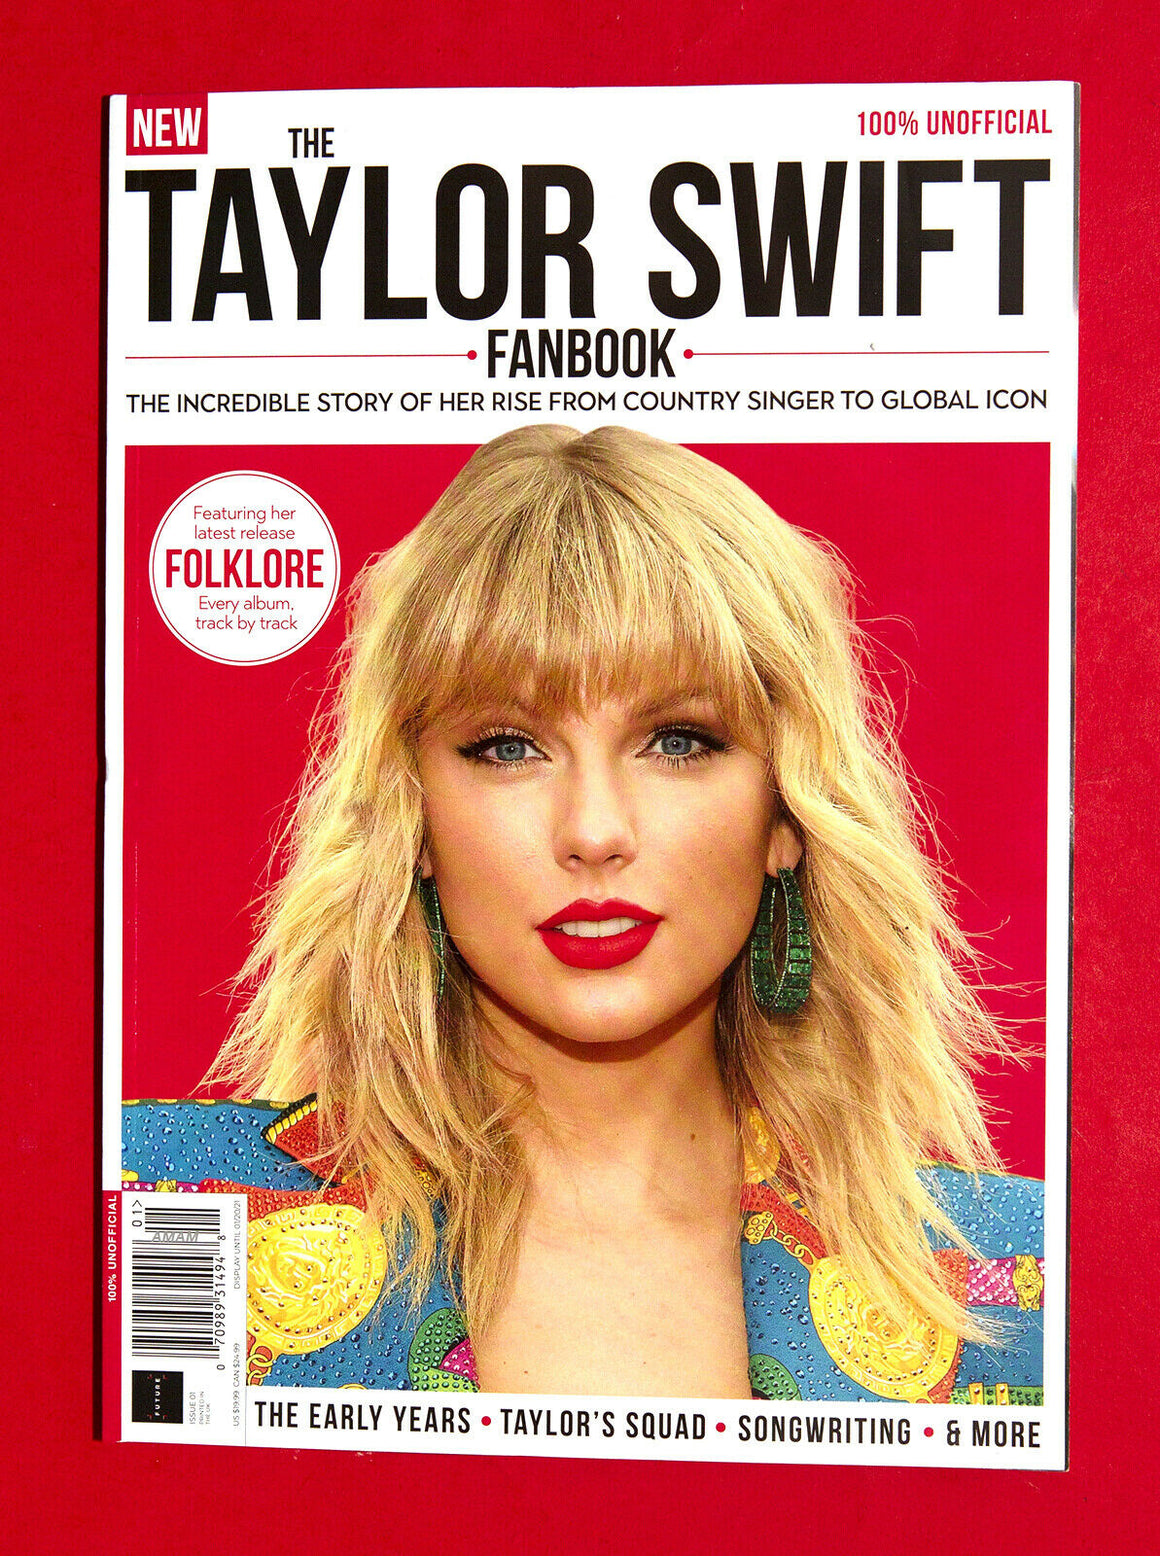 TAYLOR SWIFT FOLKLORE UK UNOFFICIAL COLLECTORS FANBOOK MAGAZINE WINTER 2020